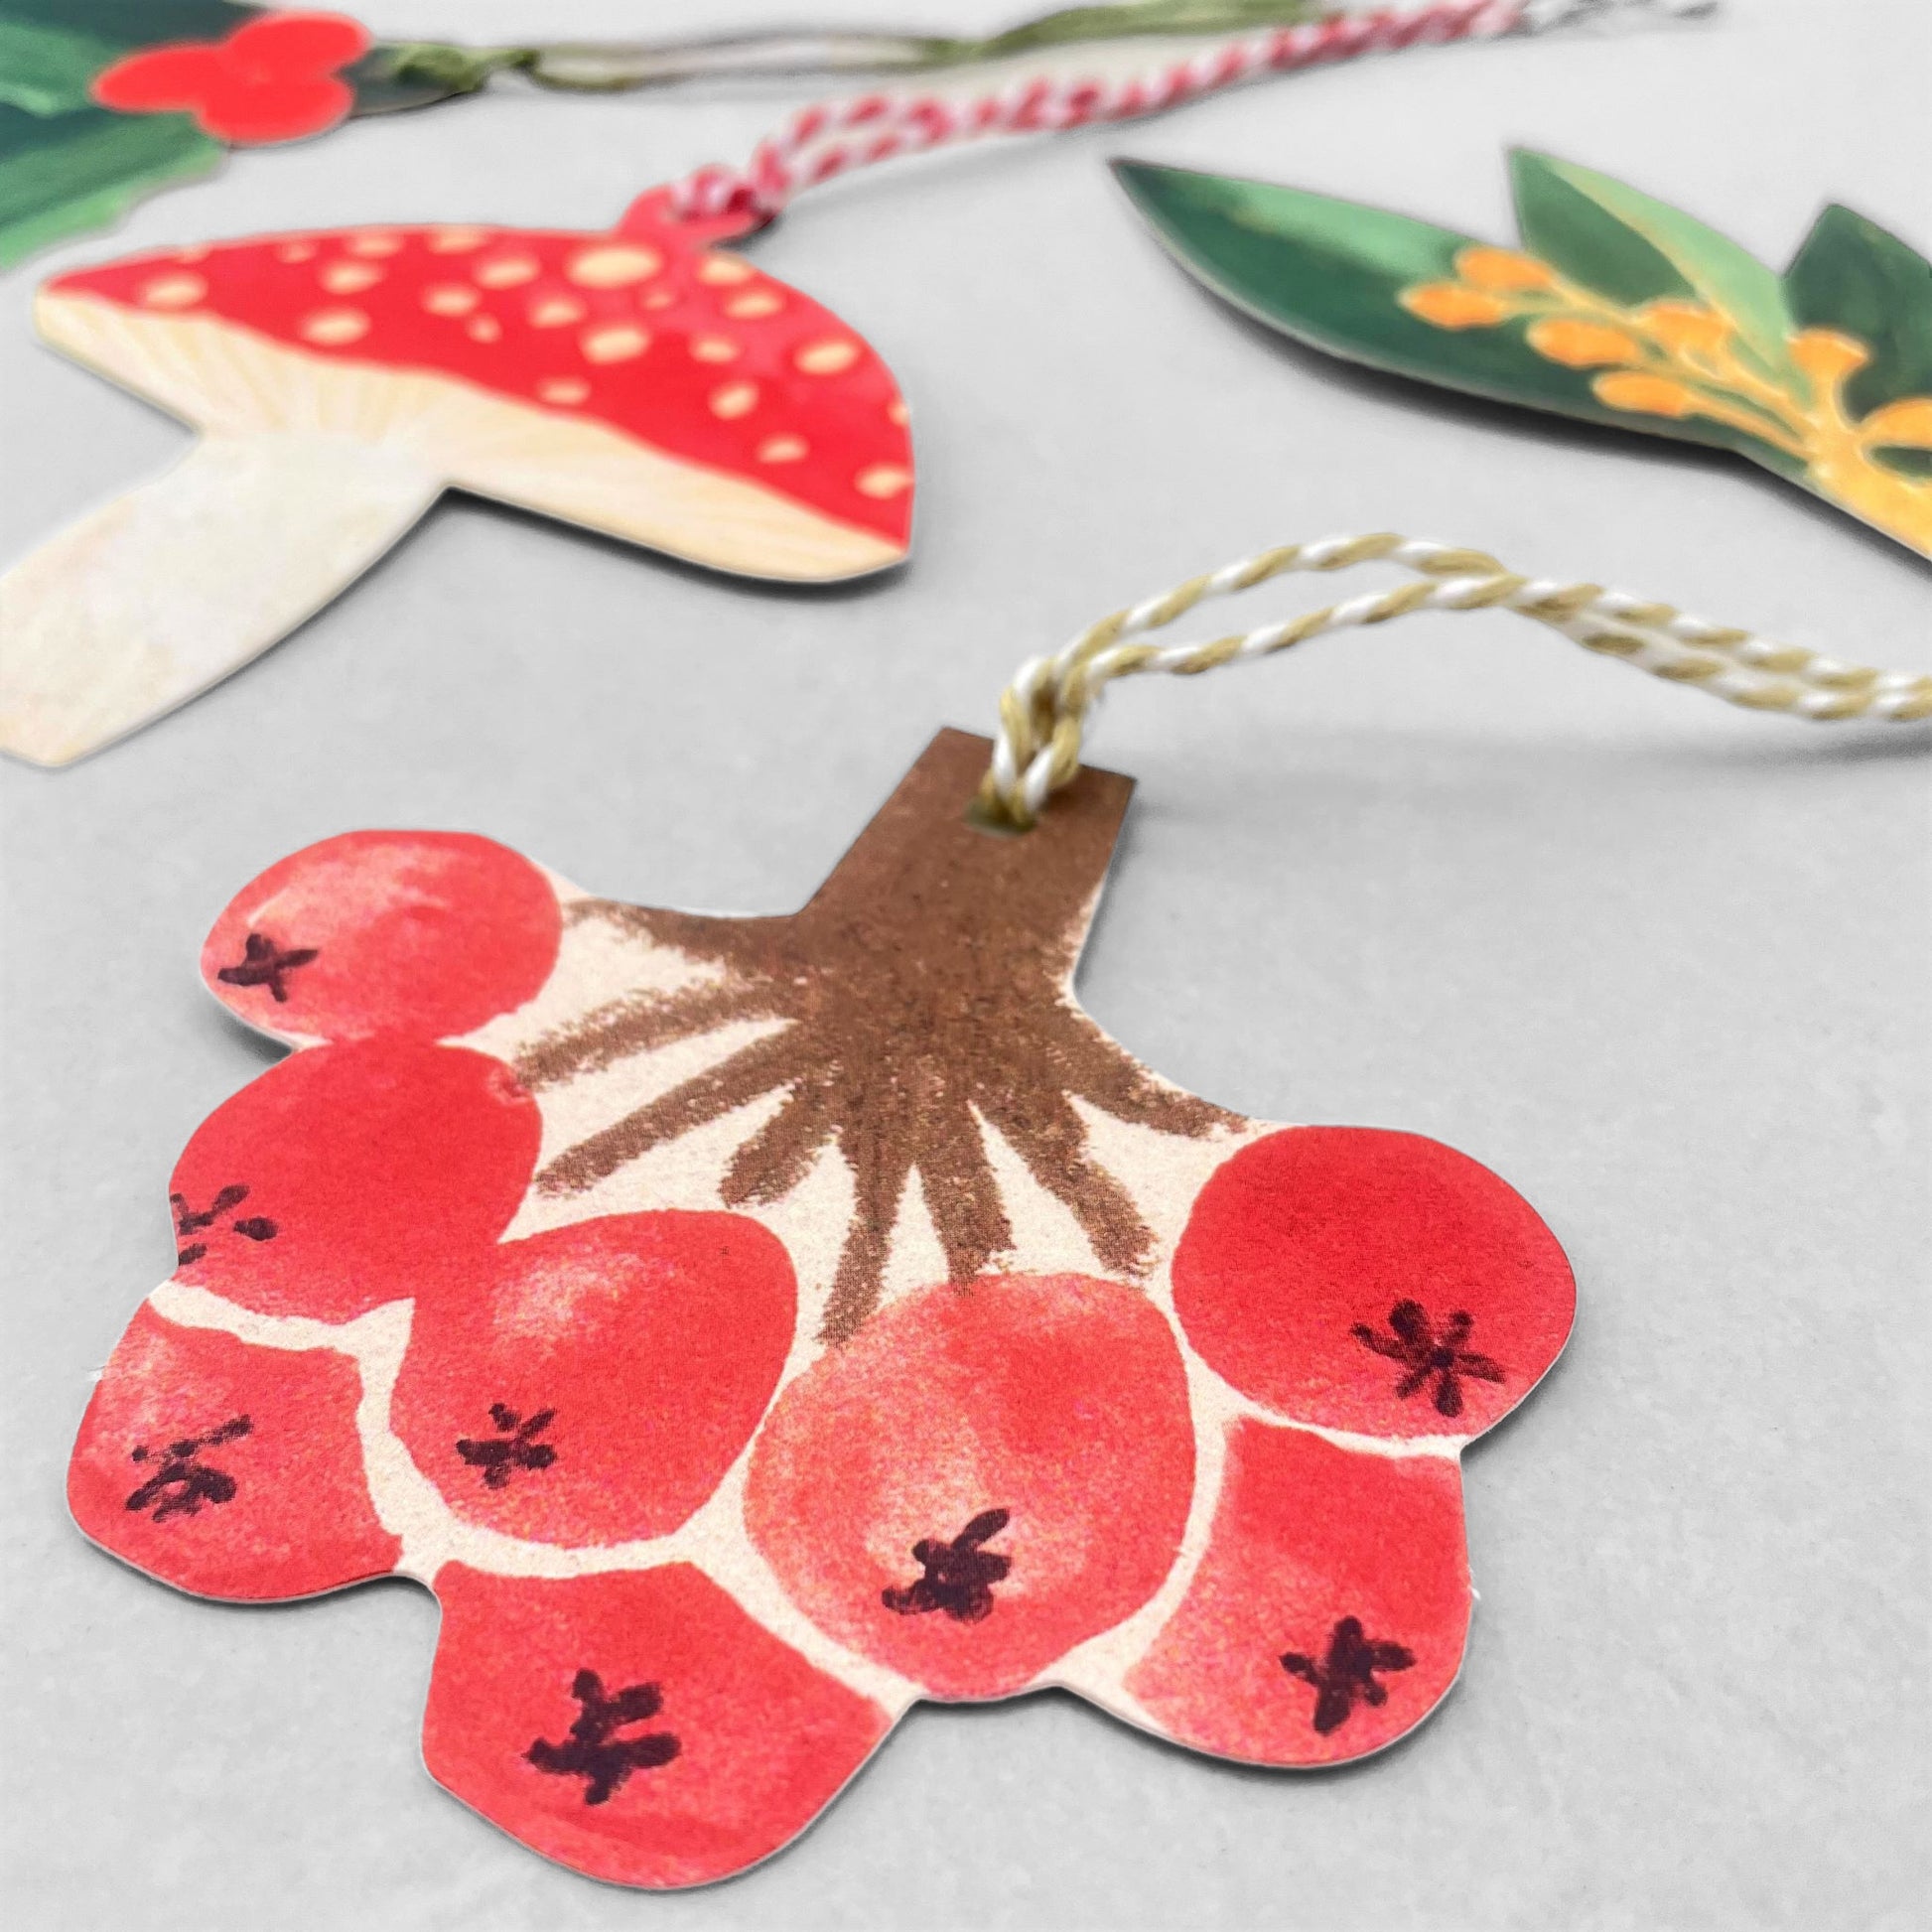 A set of five different festive plant gift tags in red, green and yellow with colourful sttring, by Hadley Paper Goods, pictured red berries